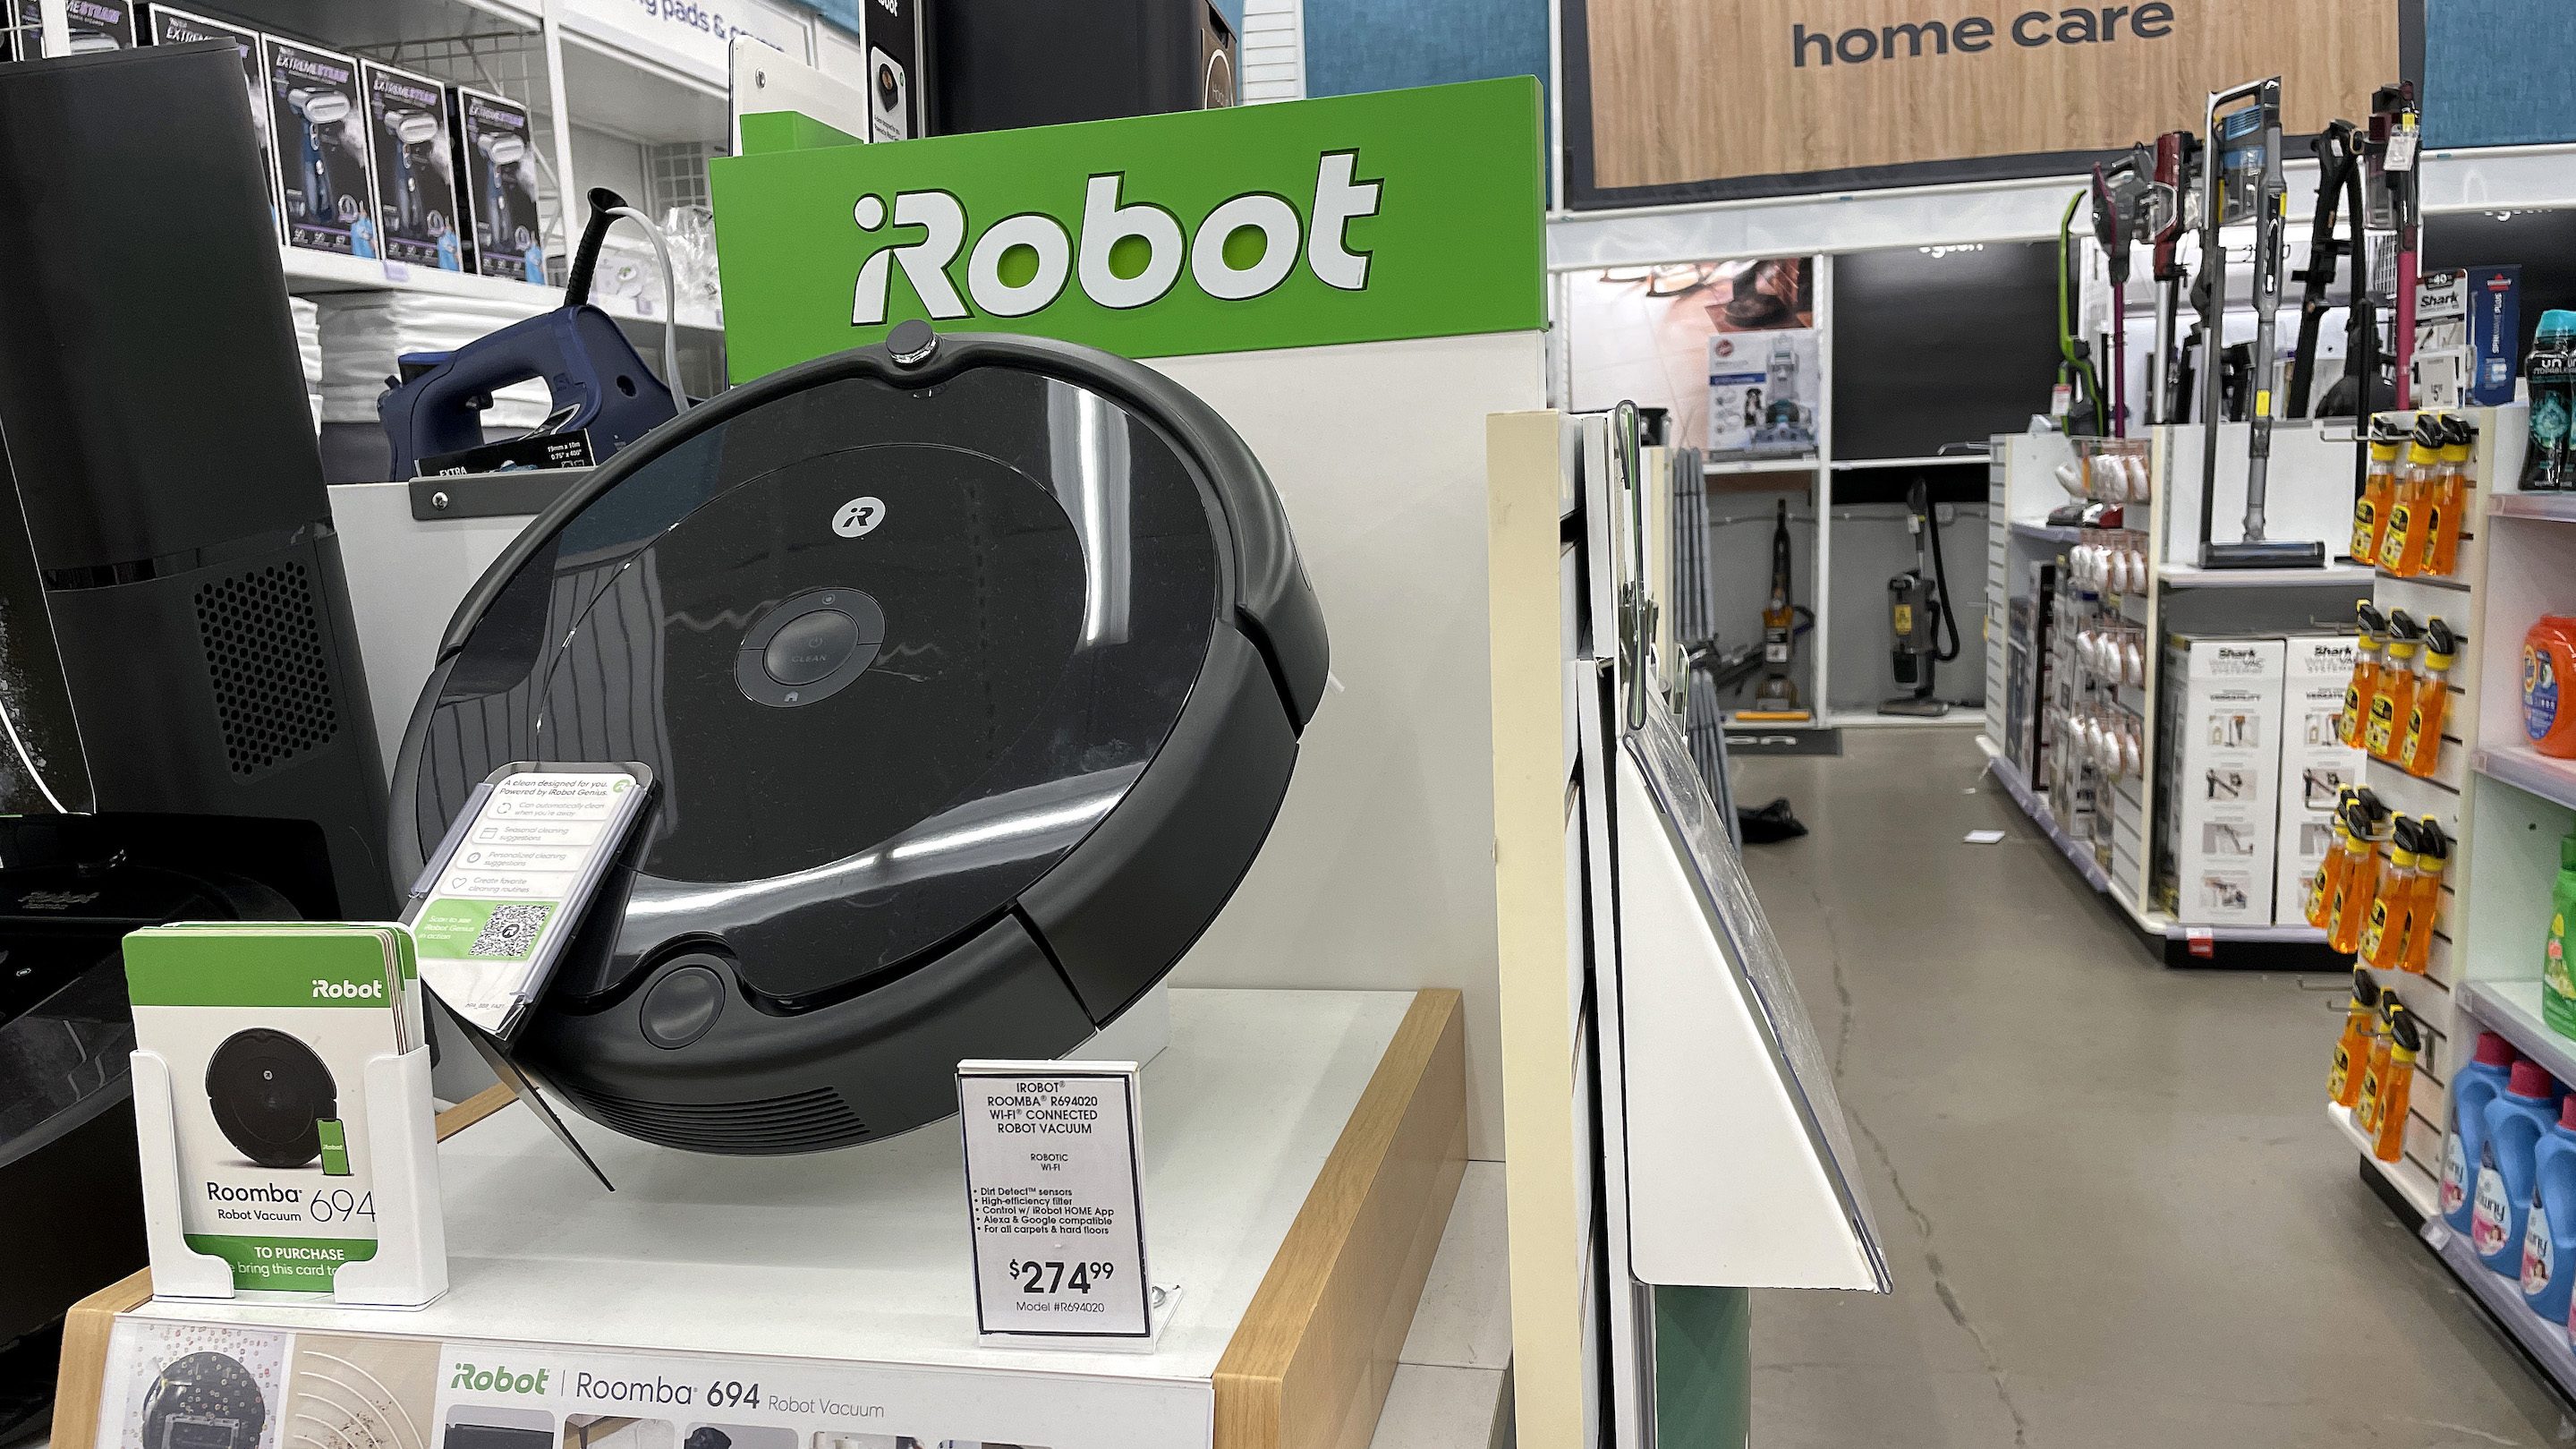 A sweet iRobot Roomba deal: This robot vacuum is $241.99 off.